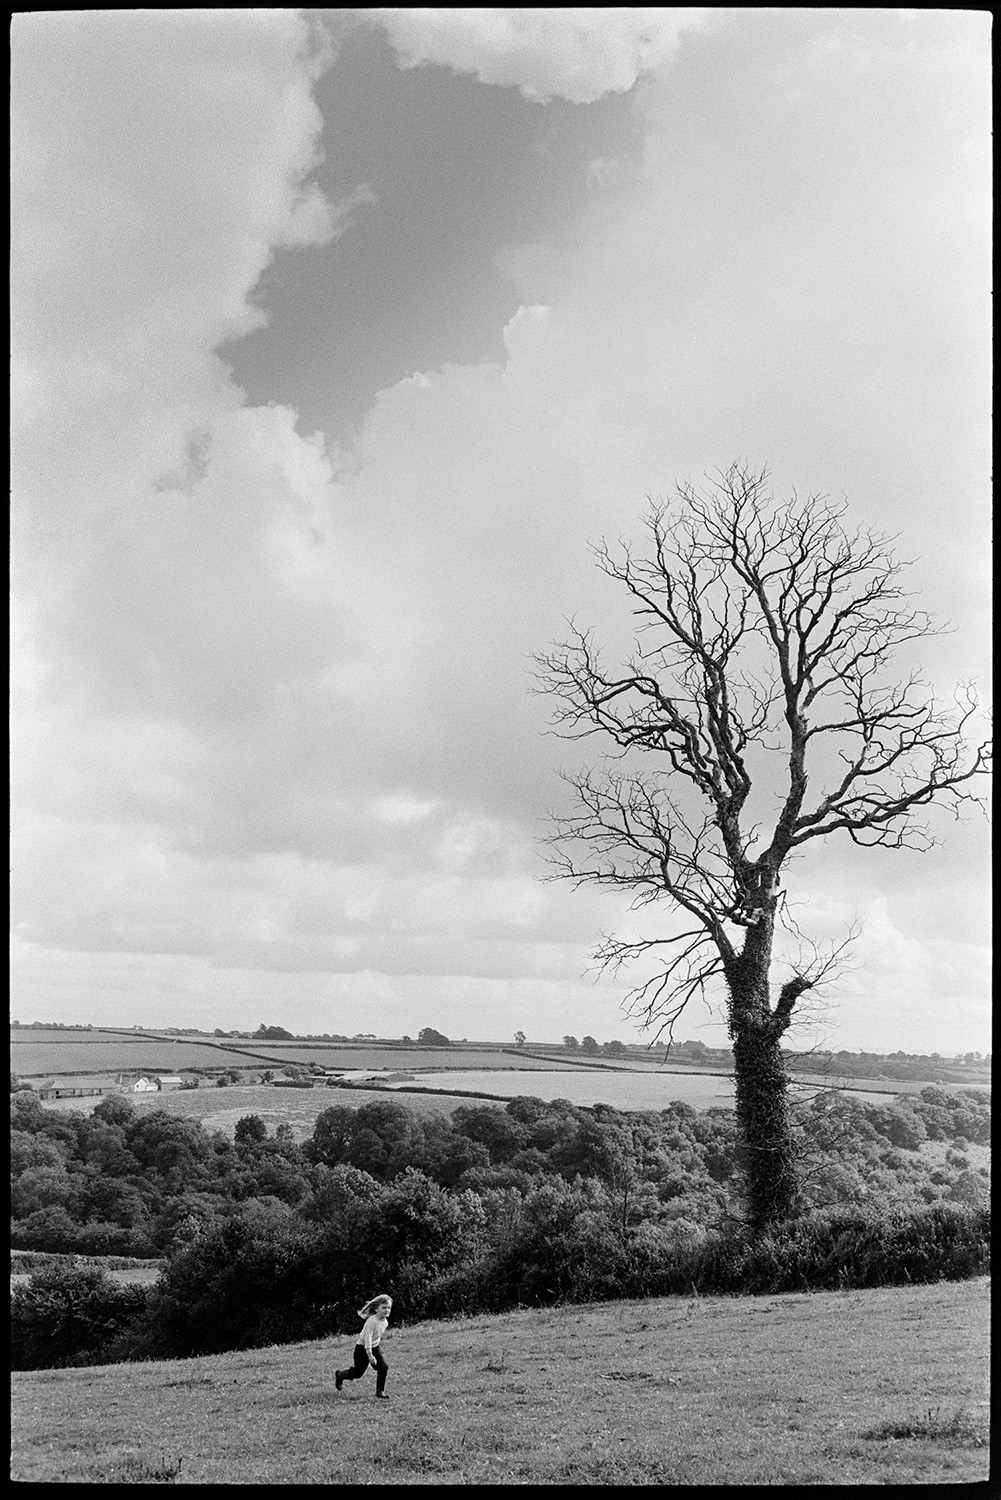 Children in field, dead elm against cloudy sky. 
[A girl running across a field at Bonleigh. A dead elm tree can be seen in a hedgerow behind her. Fields, woodland and a cloudy sky can be seen in the background.]